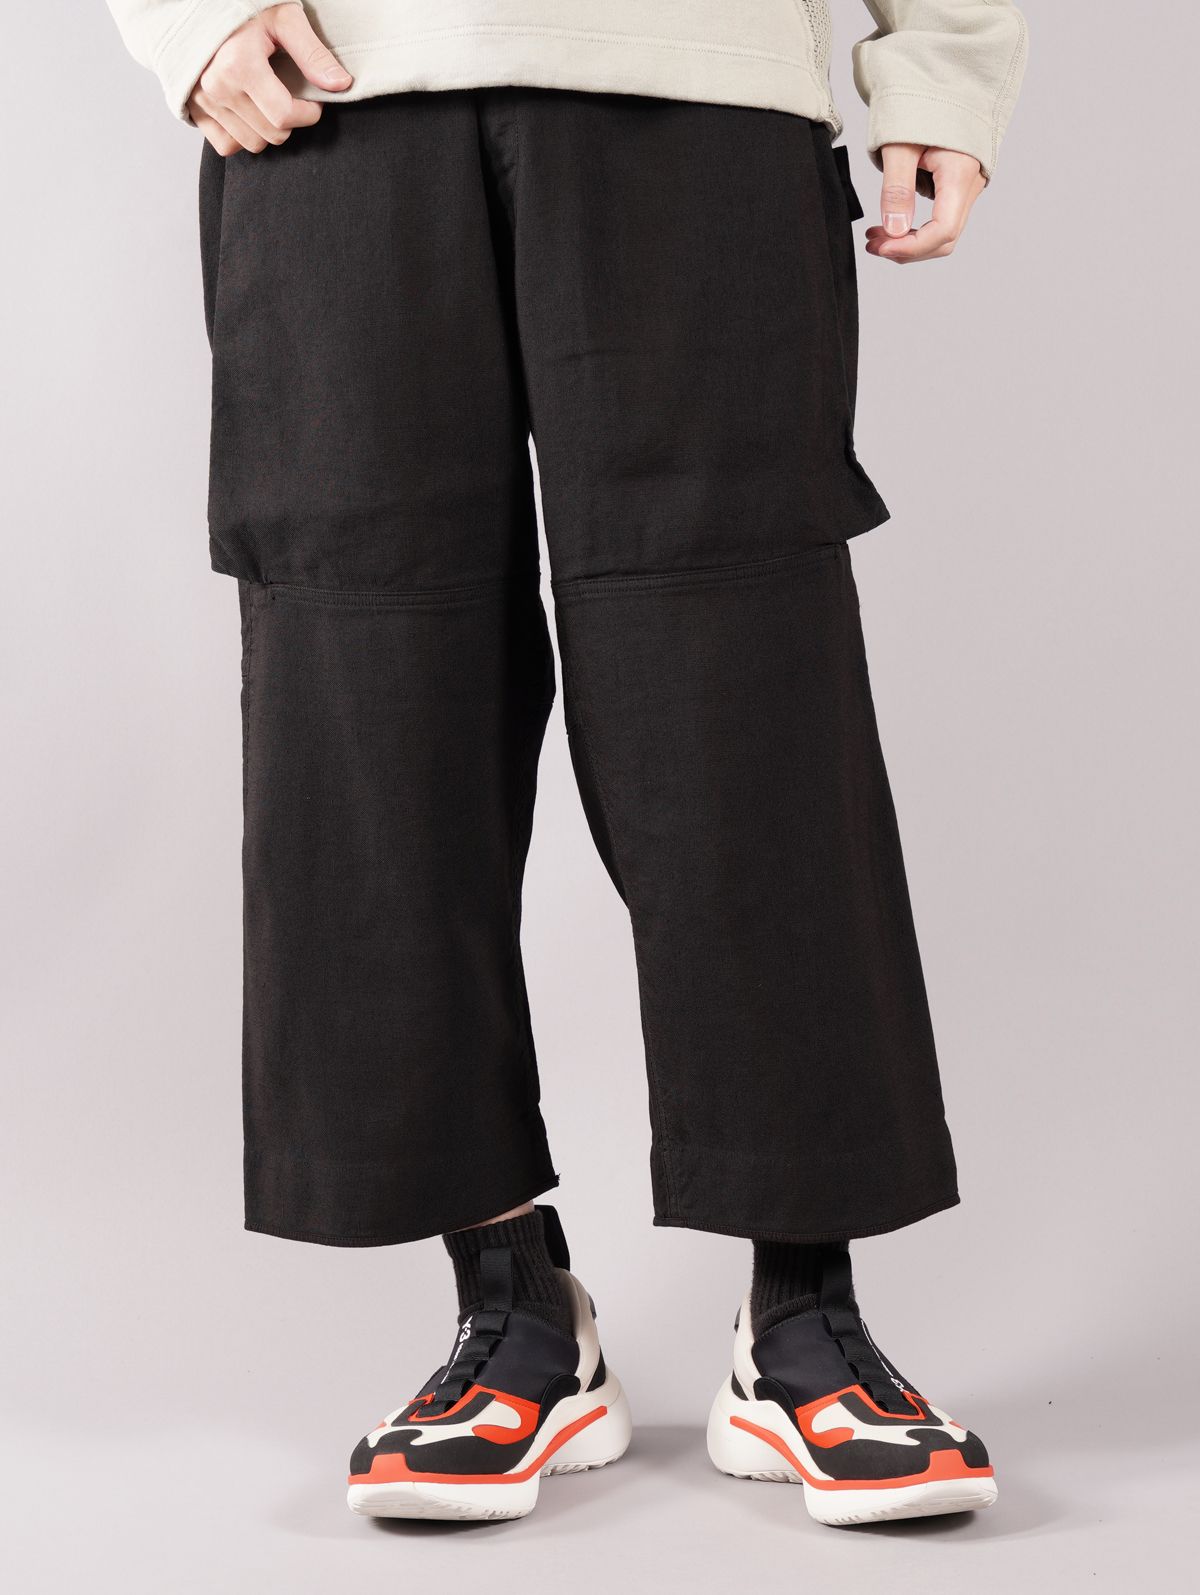 STONE ISLAND SHADOW PROJECT - WORKWEAR WIDE PANT_CHAPTER 1 LINEN